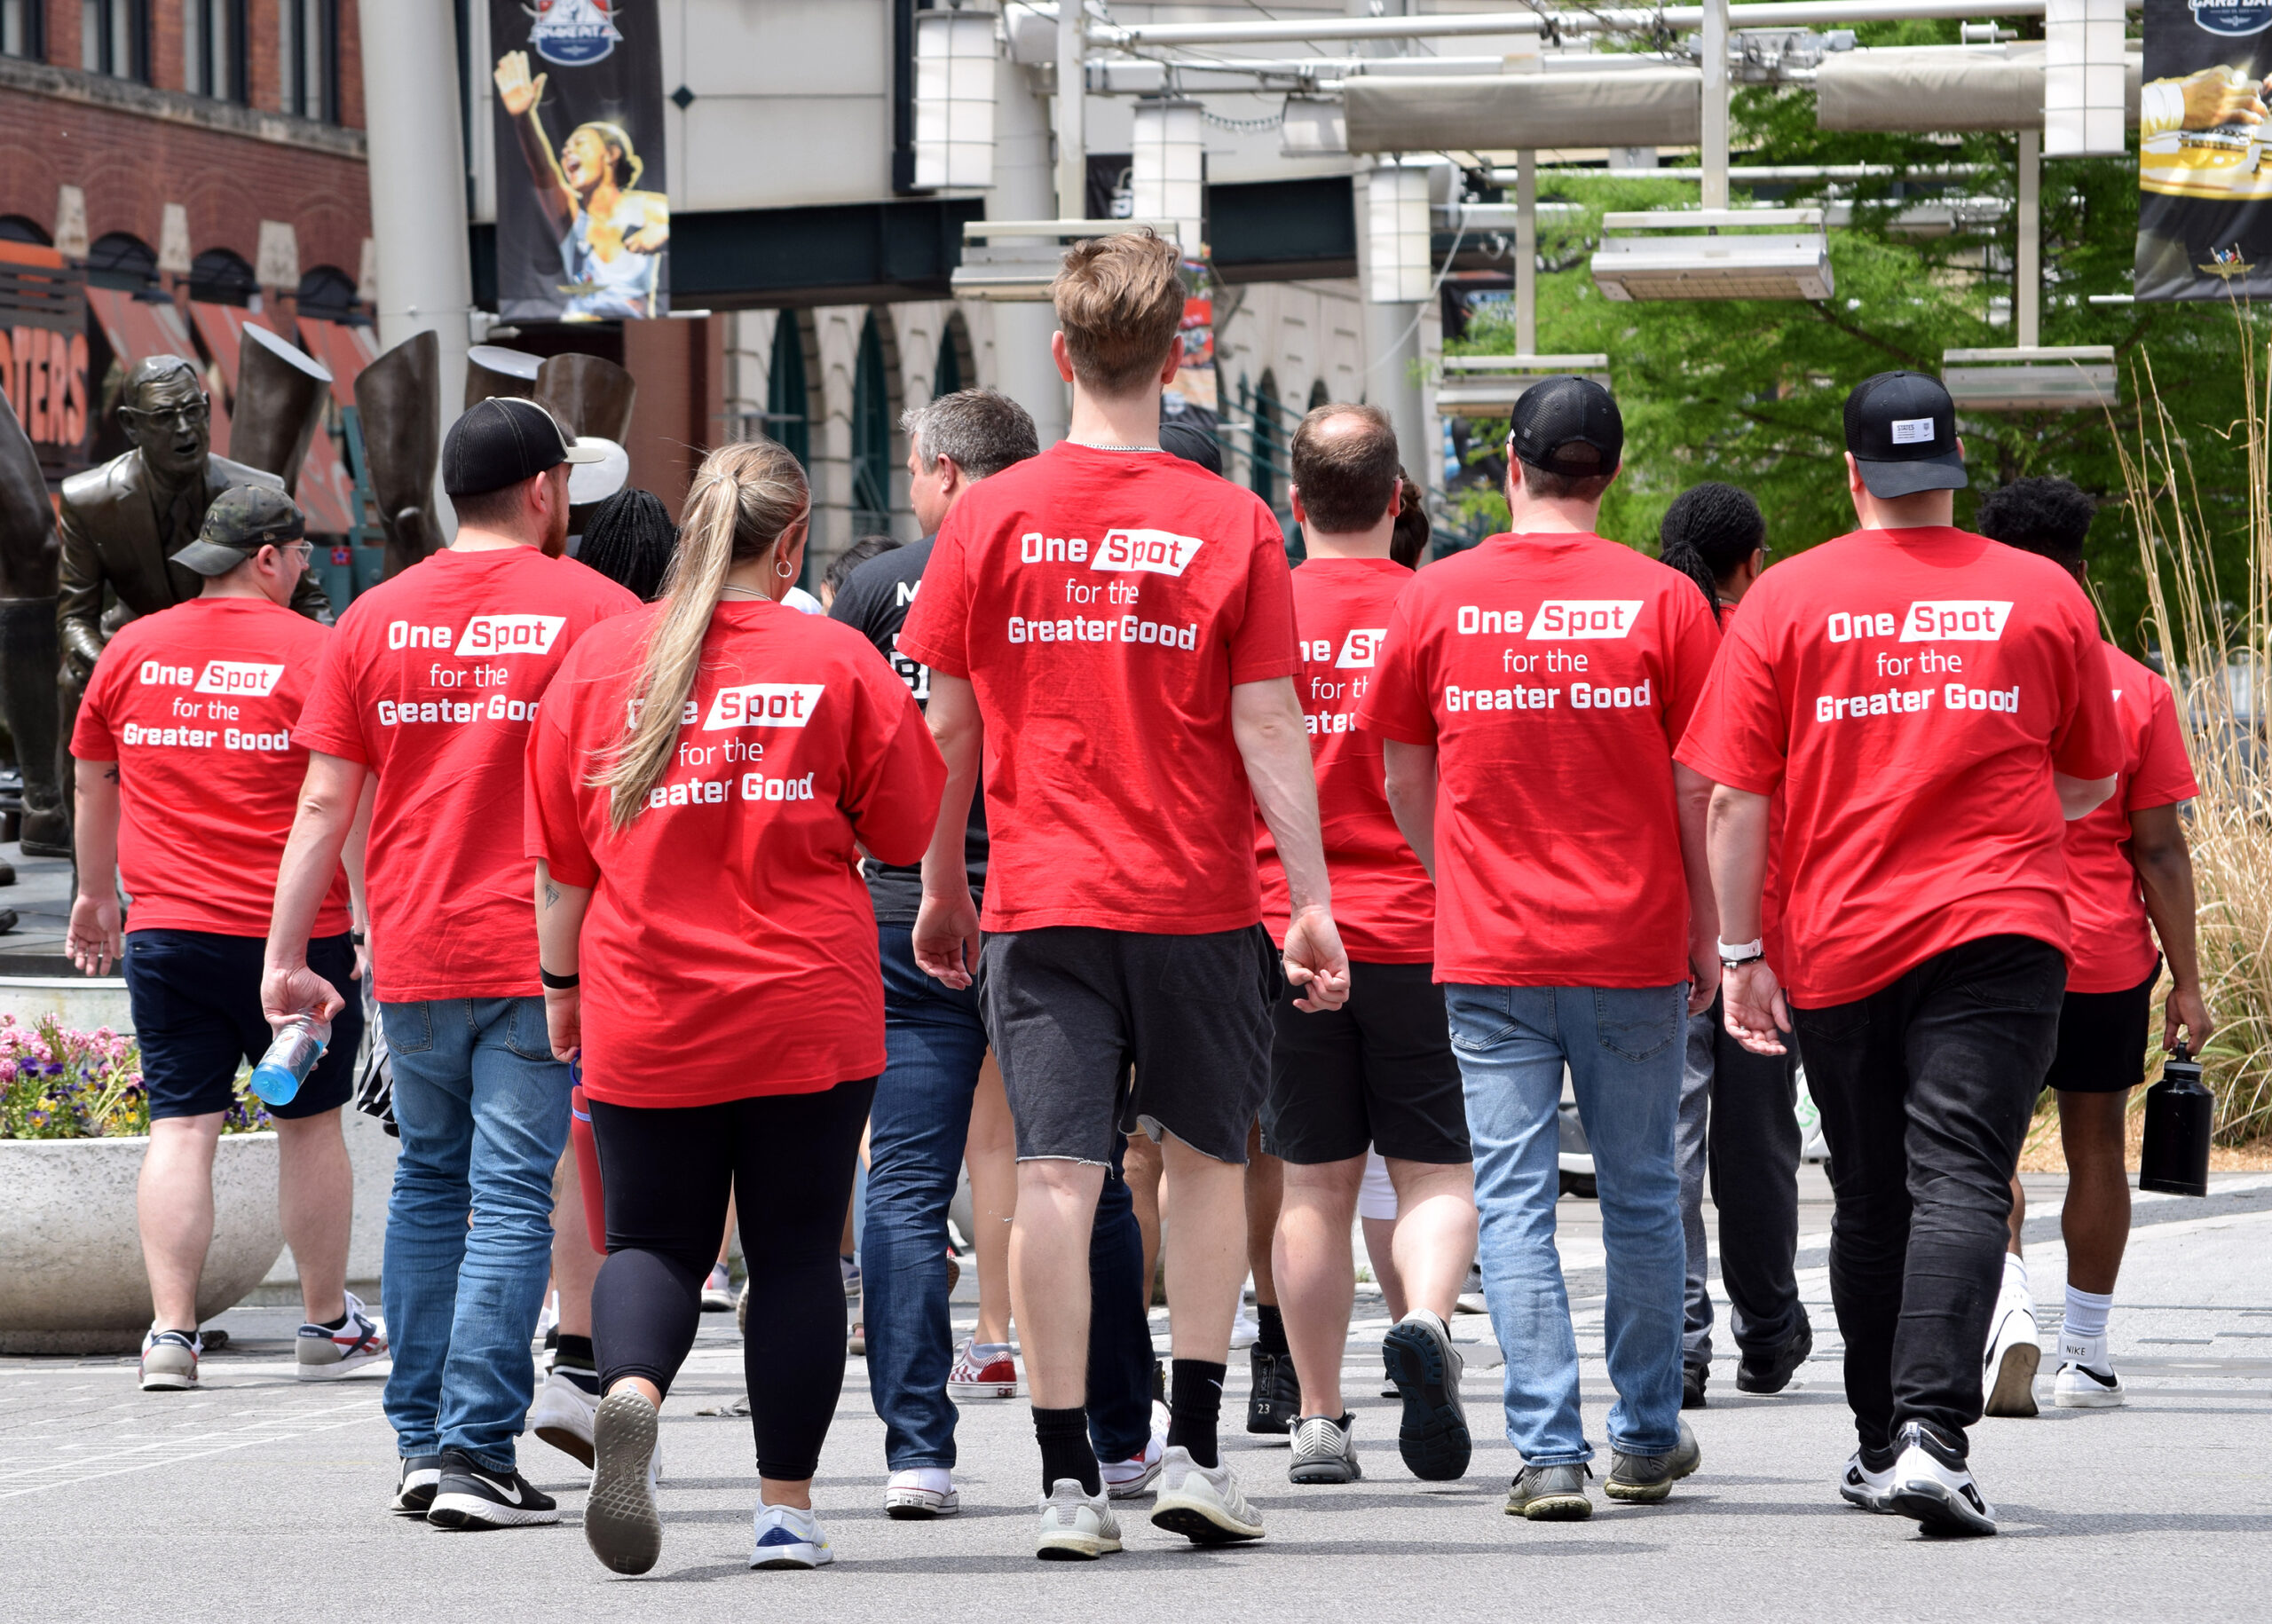 A group of Spot employees wearing read shirts walking down a street in Indianapolis. The shirts read 